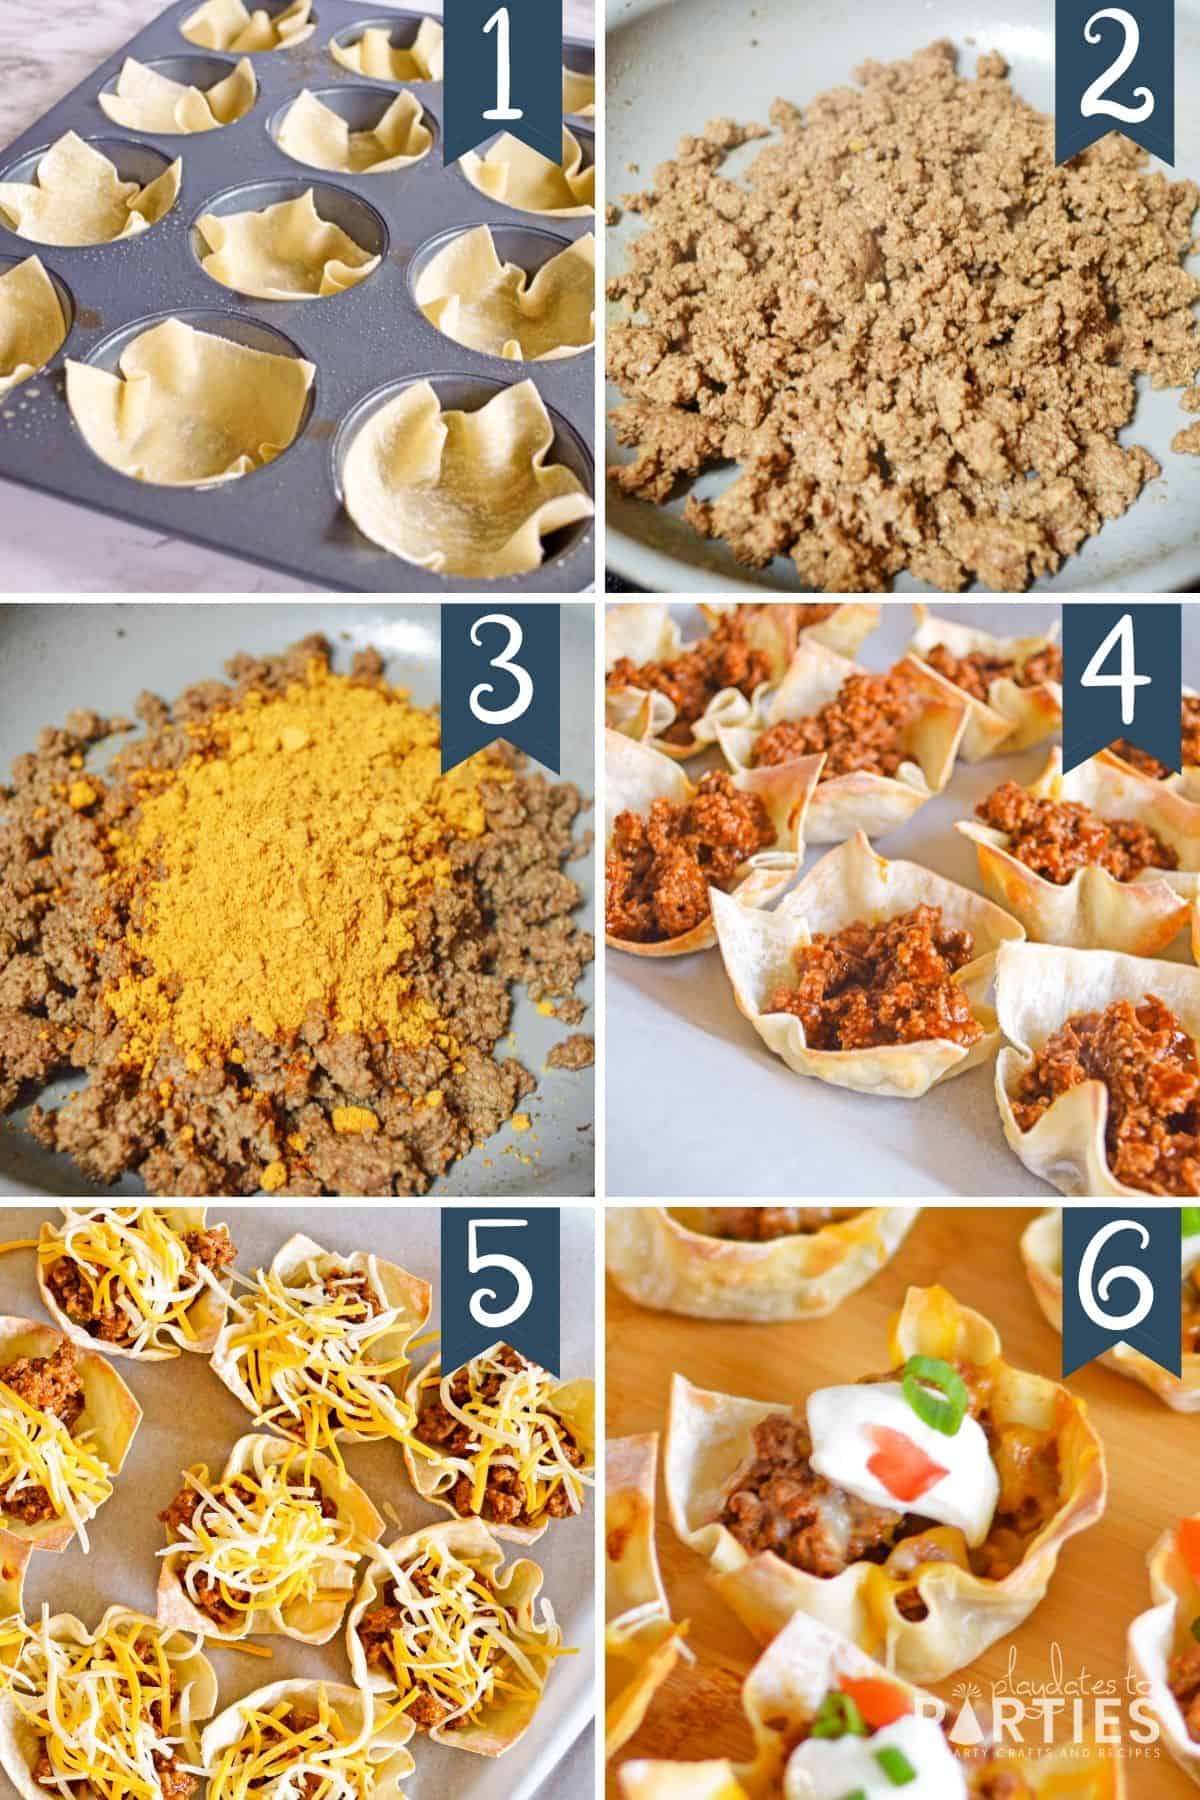 Step by step how to make wonton taco cups.